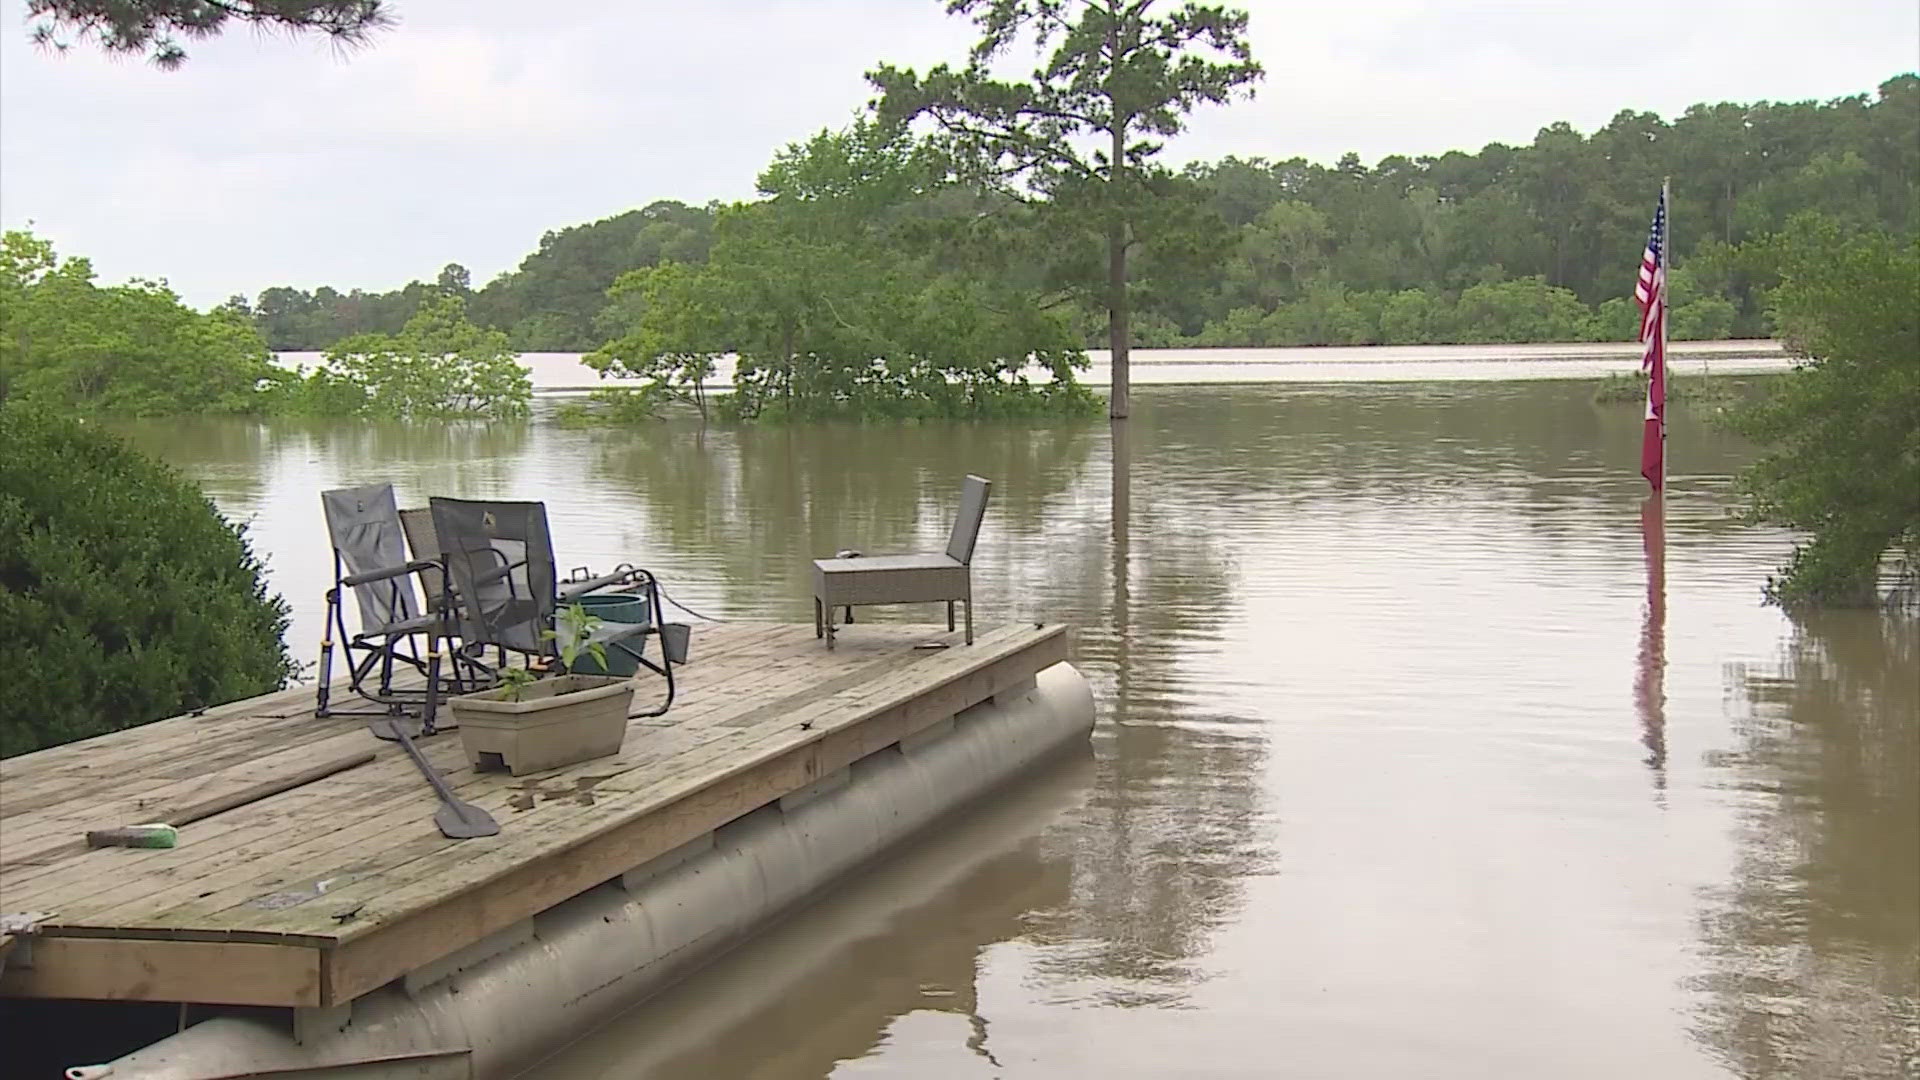 Residents near Humble are stranded by floodwater, with more rain on the way.